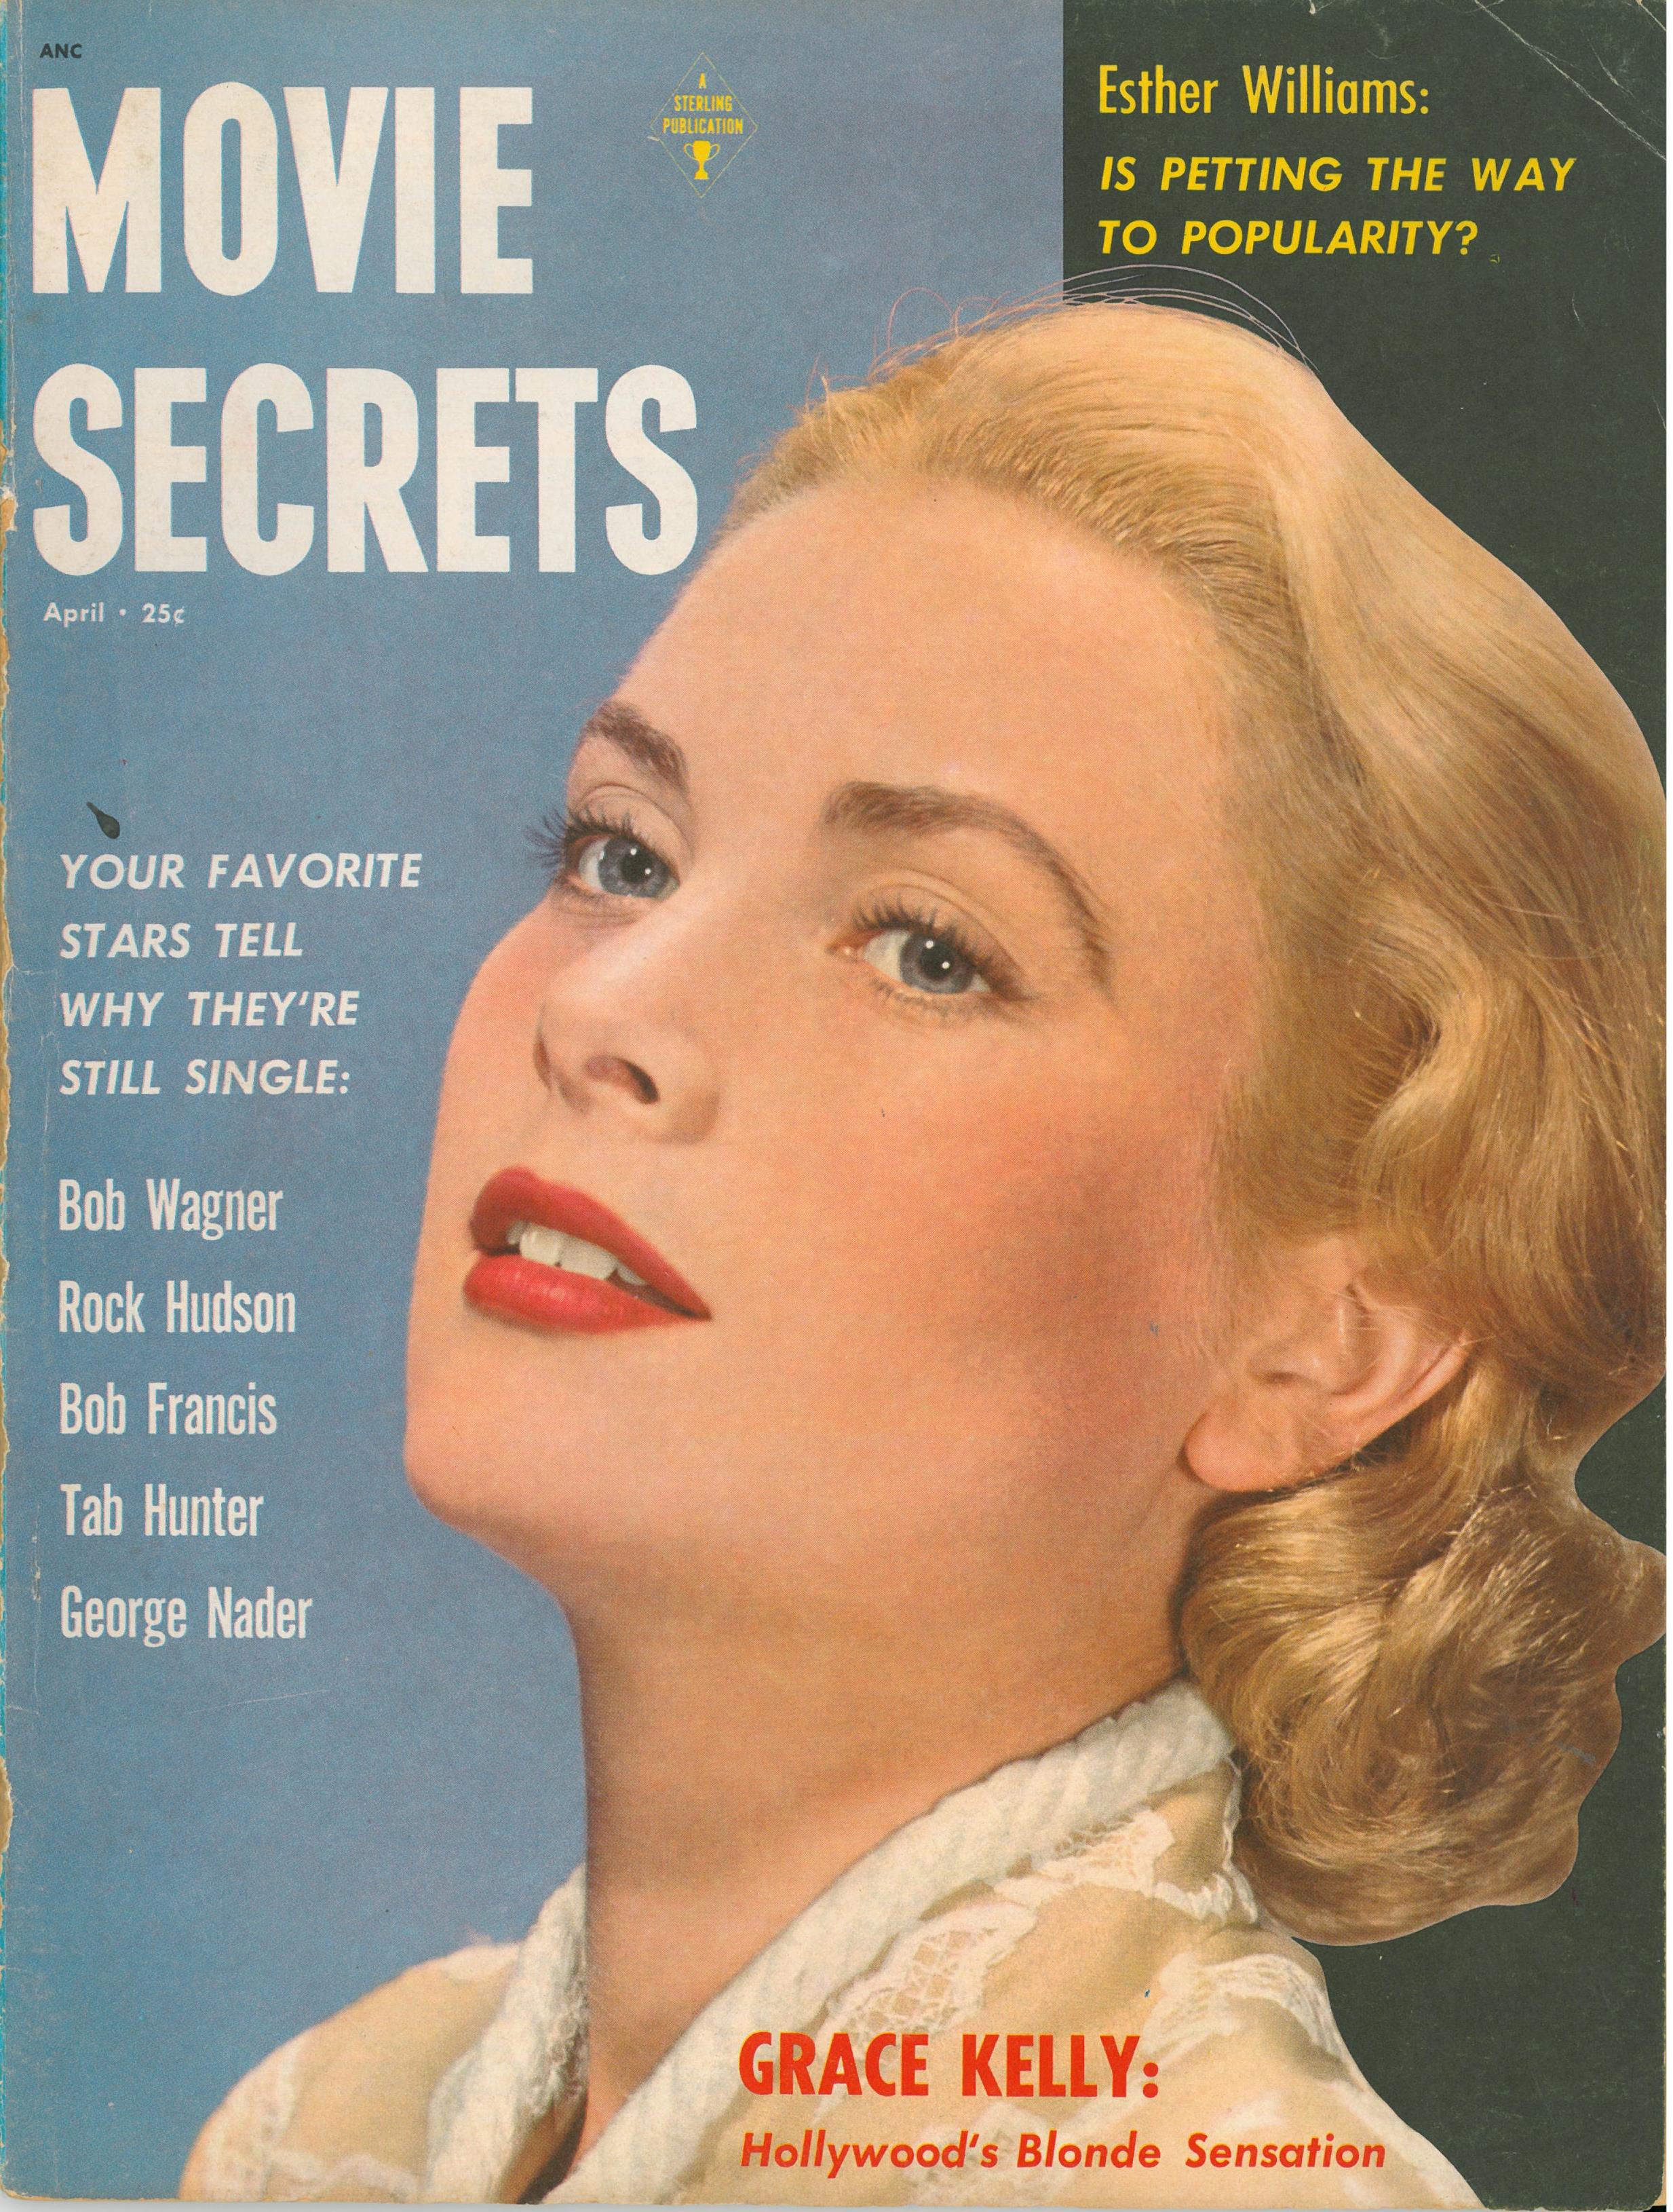   Movie Secrets,  April 1955, on newsstands in early March 1955. Photo of May Wynn and Bob, c. Summer 1954.  